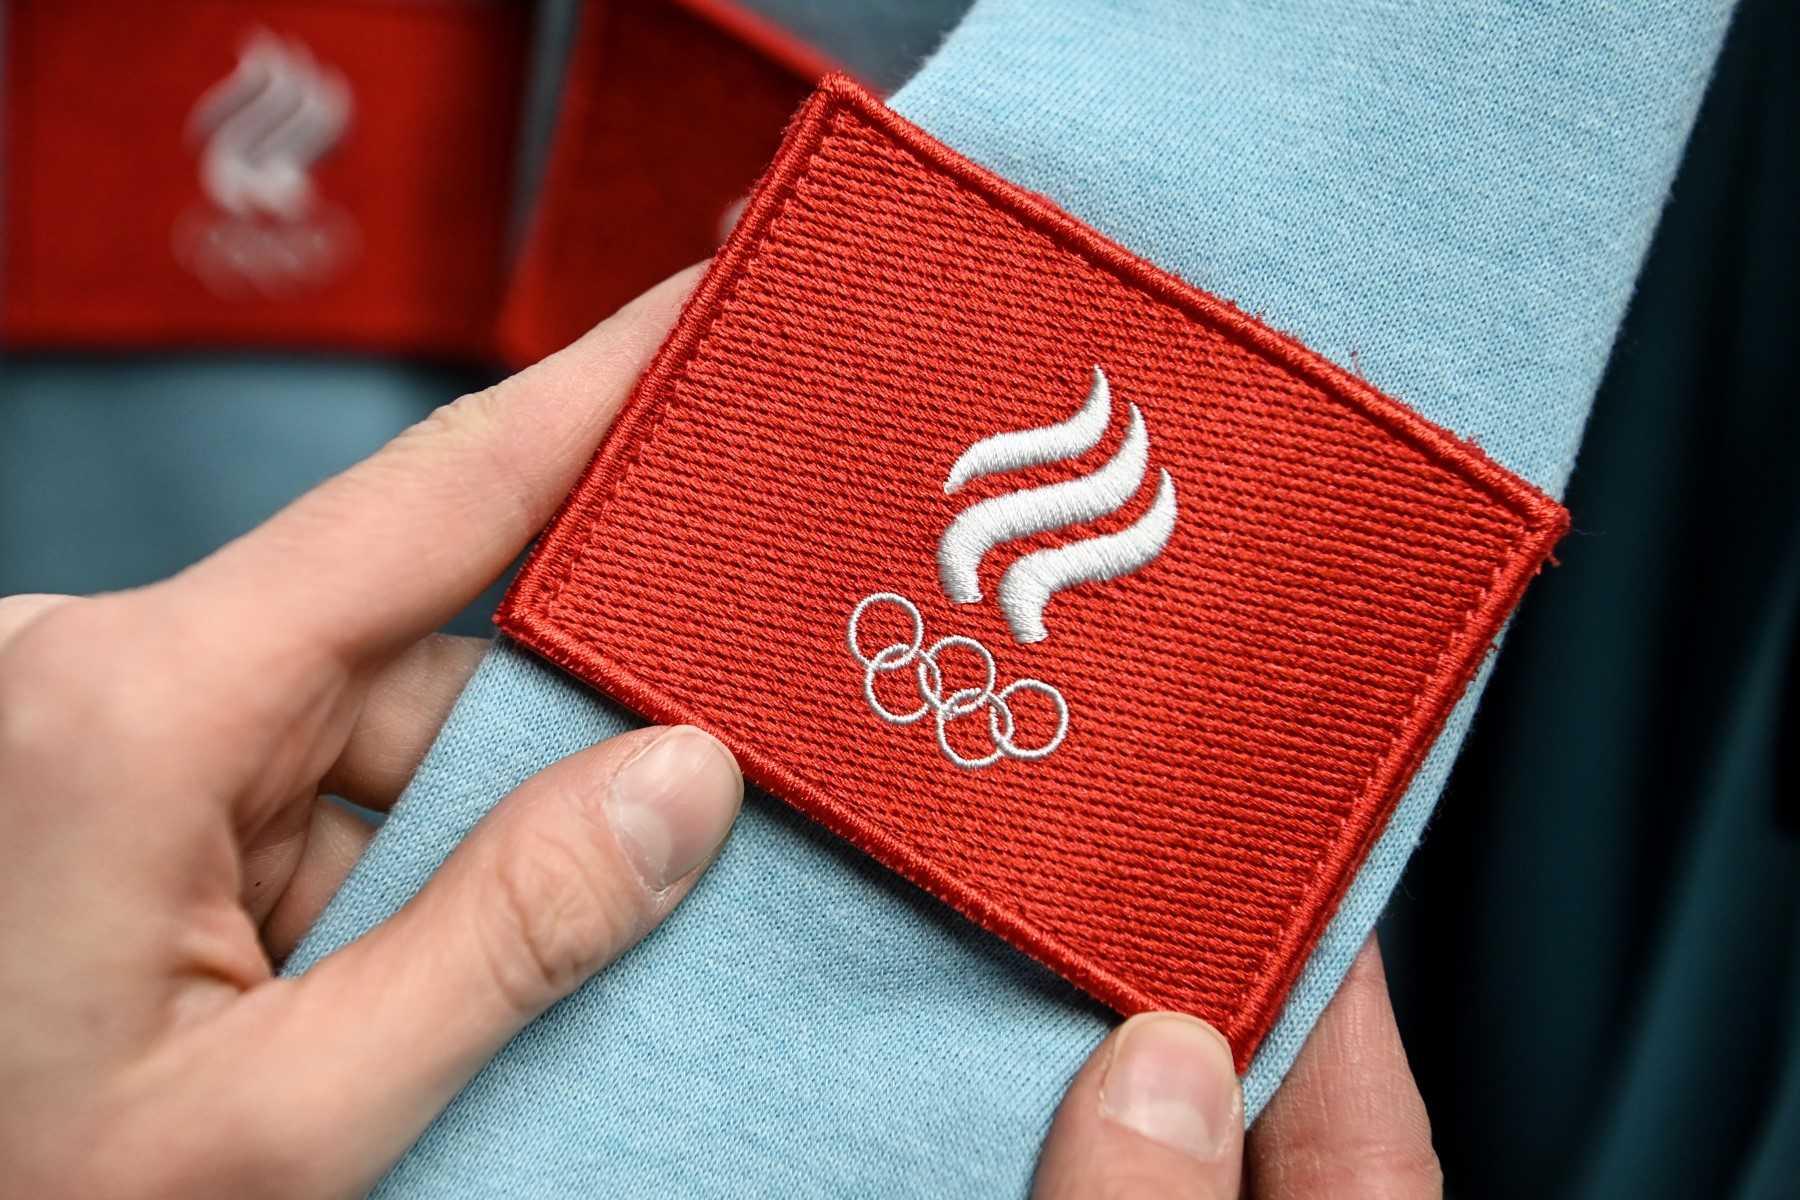 A patch with the Russian Olympic team emblem is pictured during the opening of an equipment centre for athletes and delegation members going to the Beijing 2022 Winter Olympic Games in Moscow on Jan 14, 2022. Photo: AFP